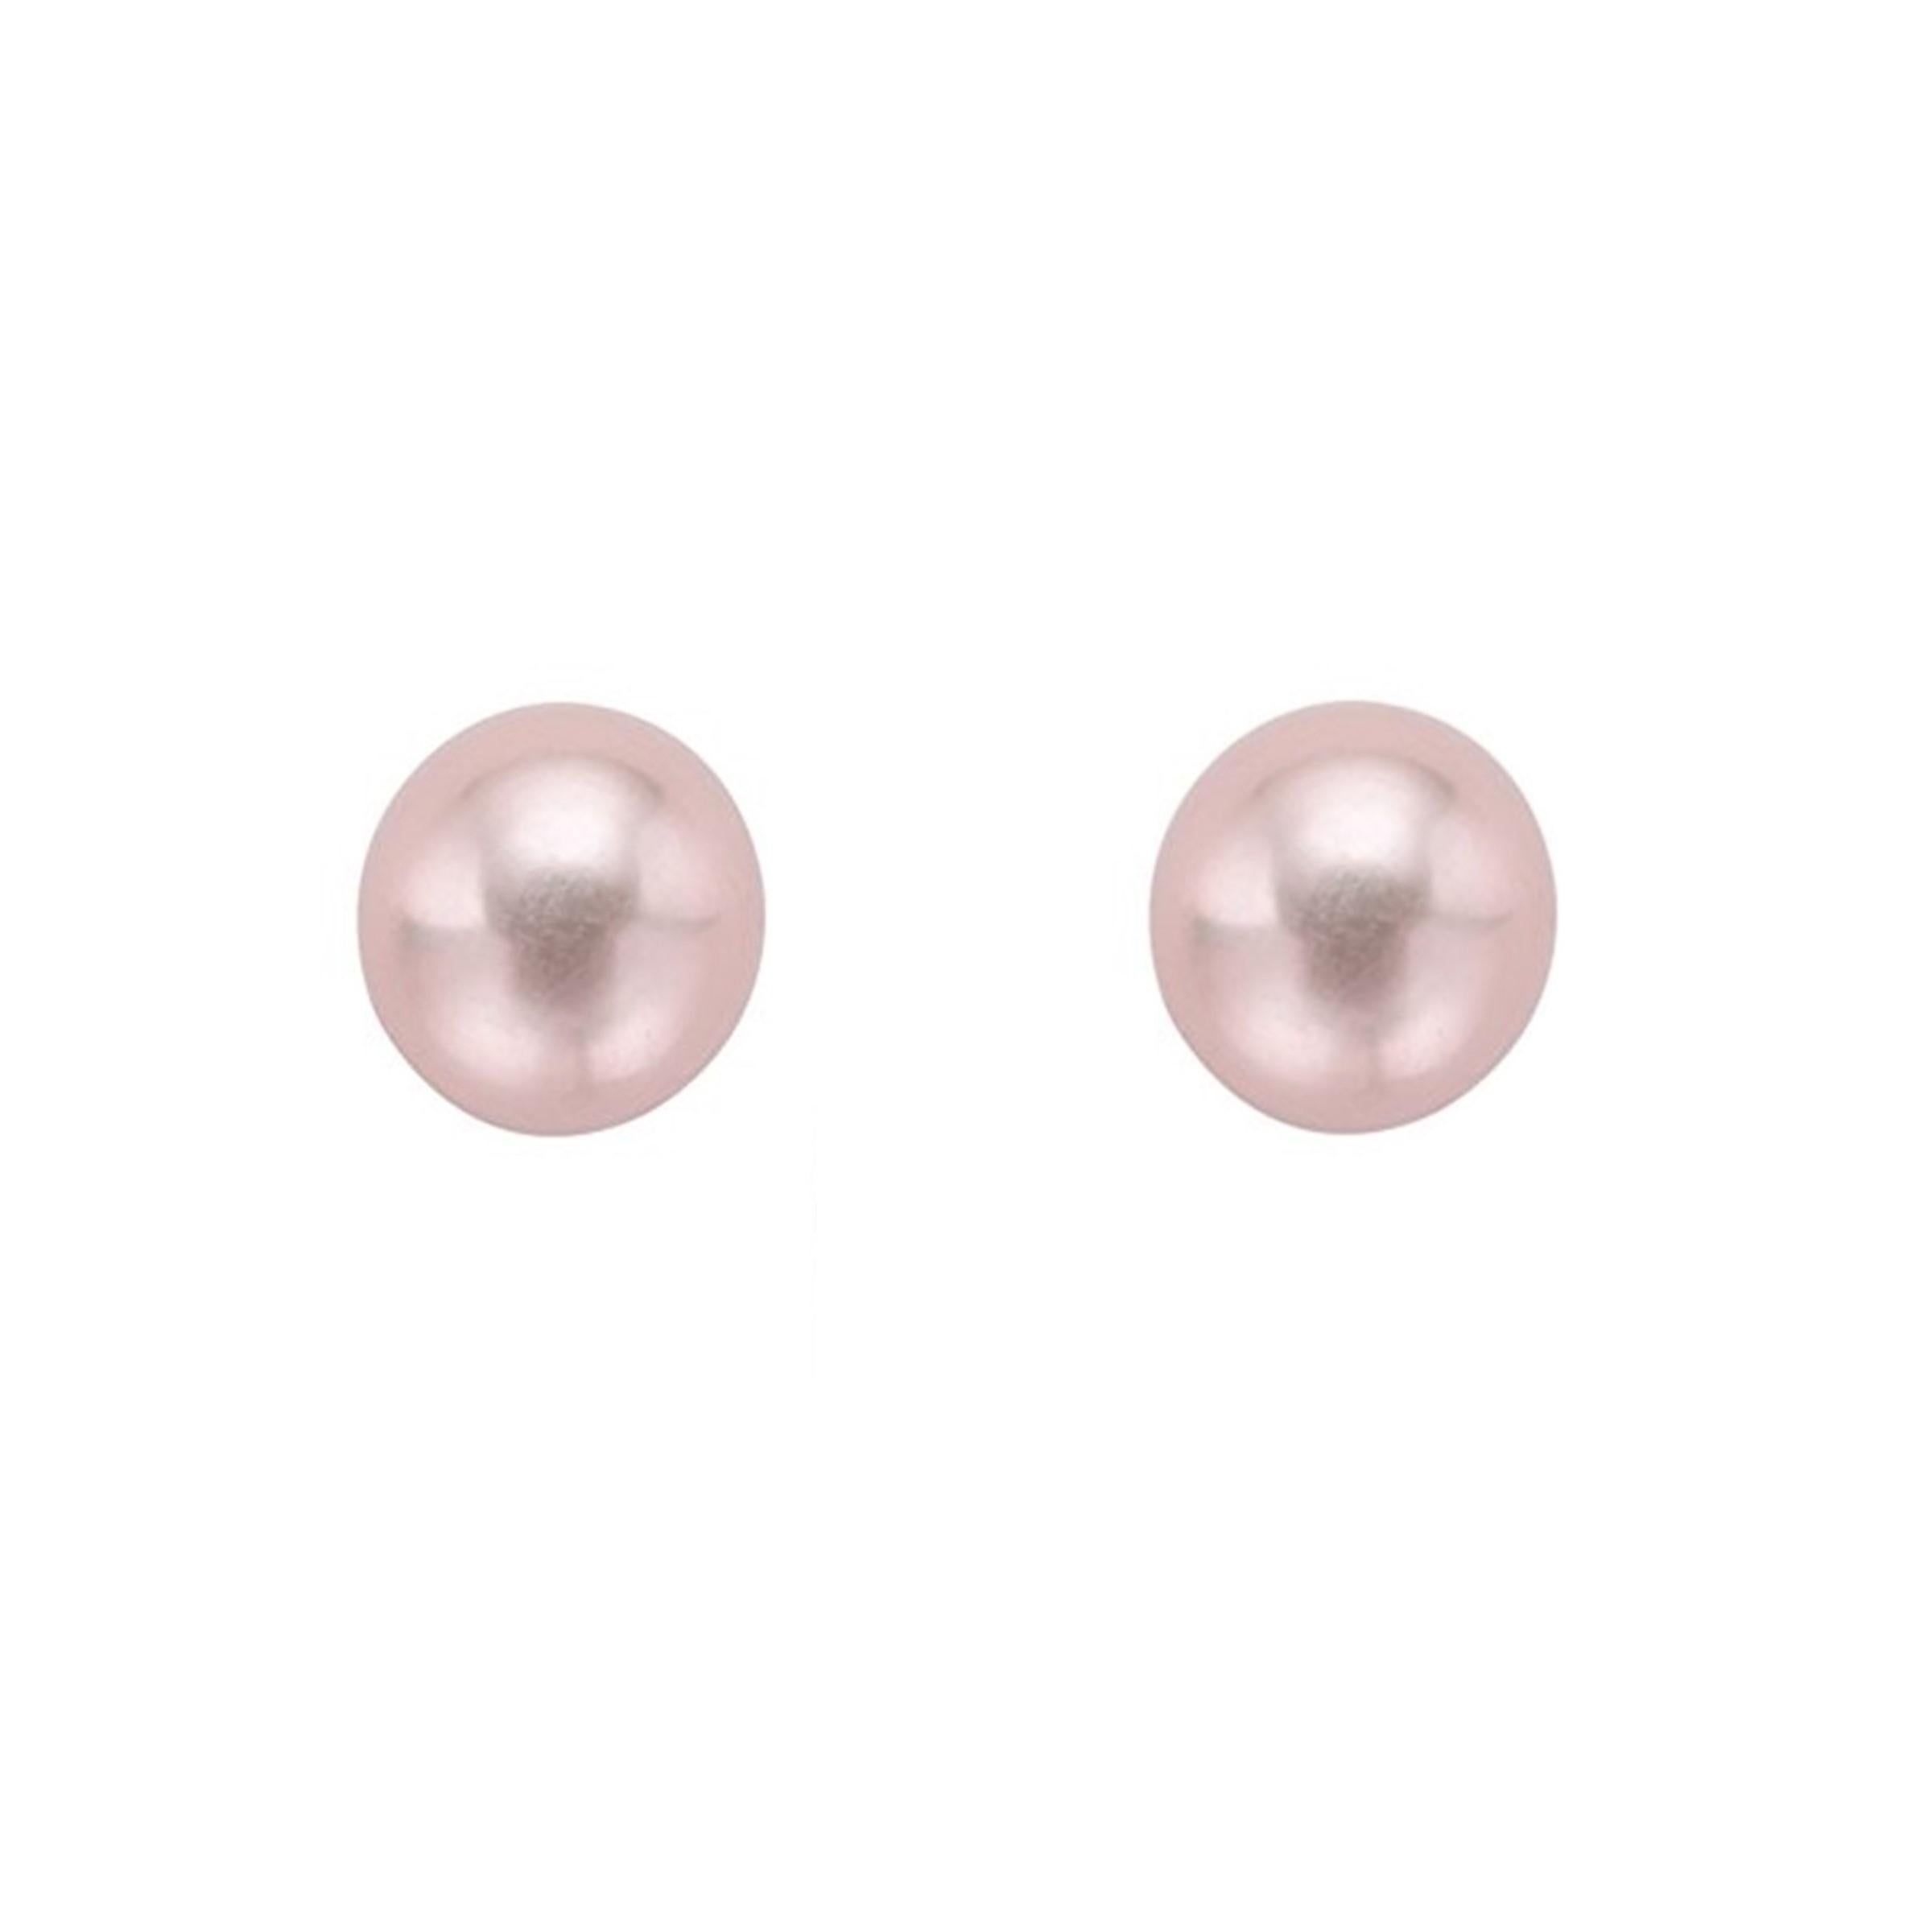 Simplicity and understated elegance have never made such a perfect combination. A beautiful pair of cultured freshwater pearls set on 14K white gold stud backings. The pearl earrings have a 'Very High' grade luster.

Pearl Type: Freshwater